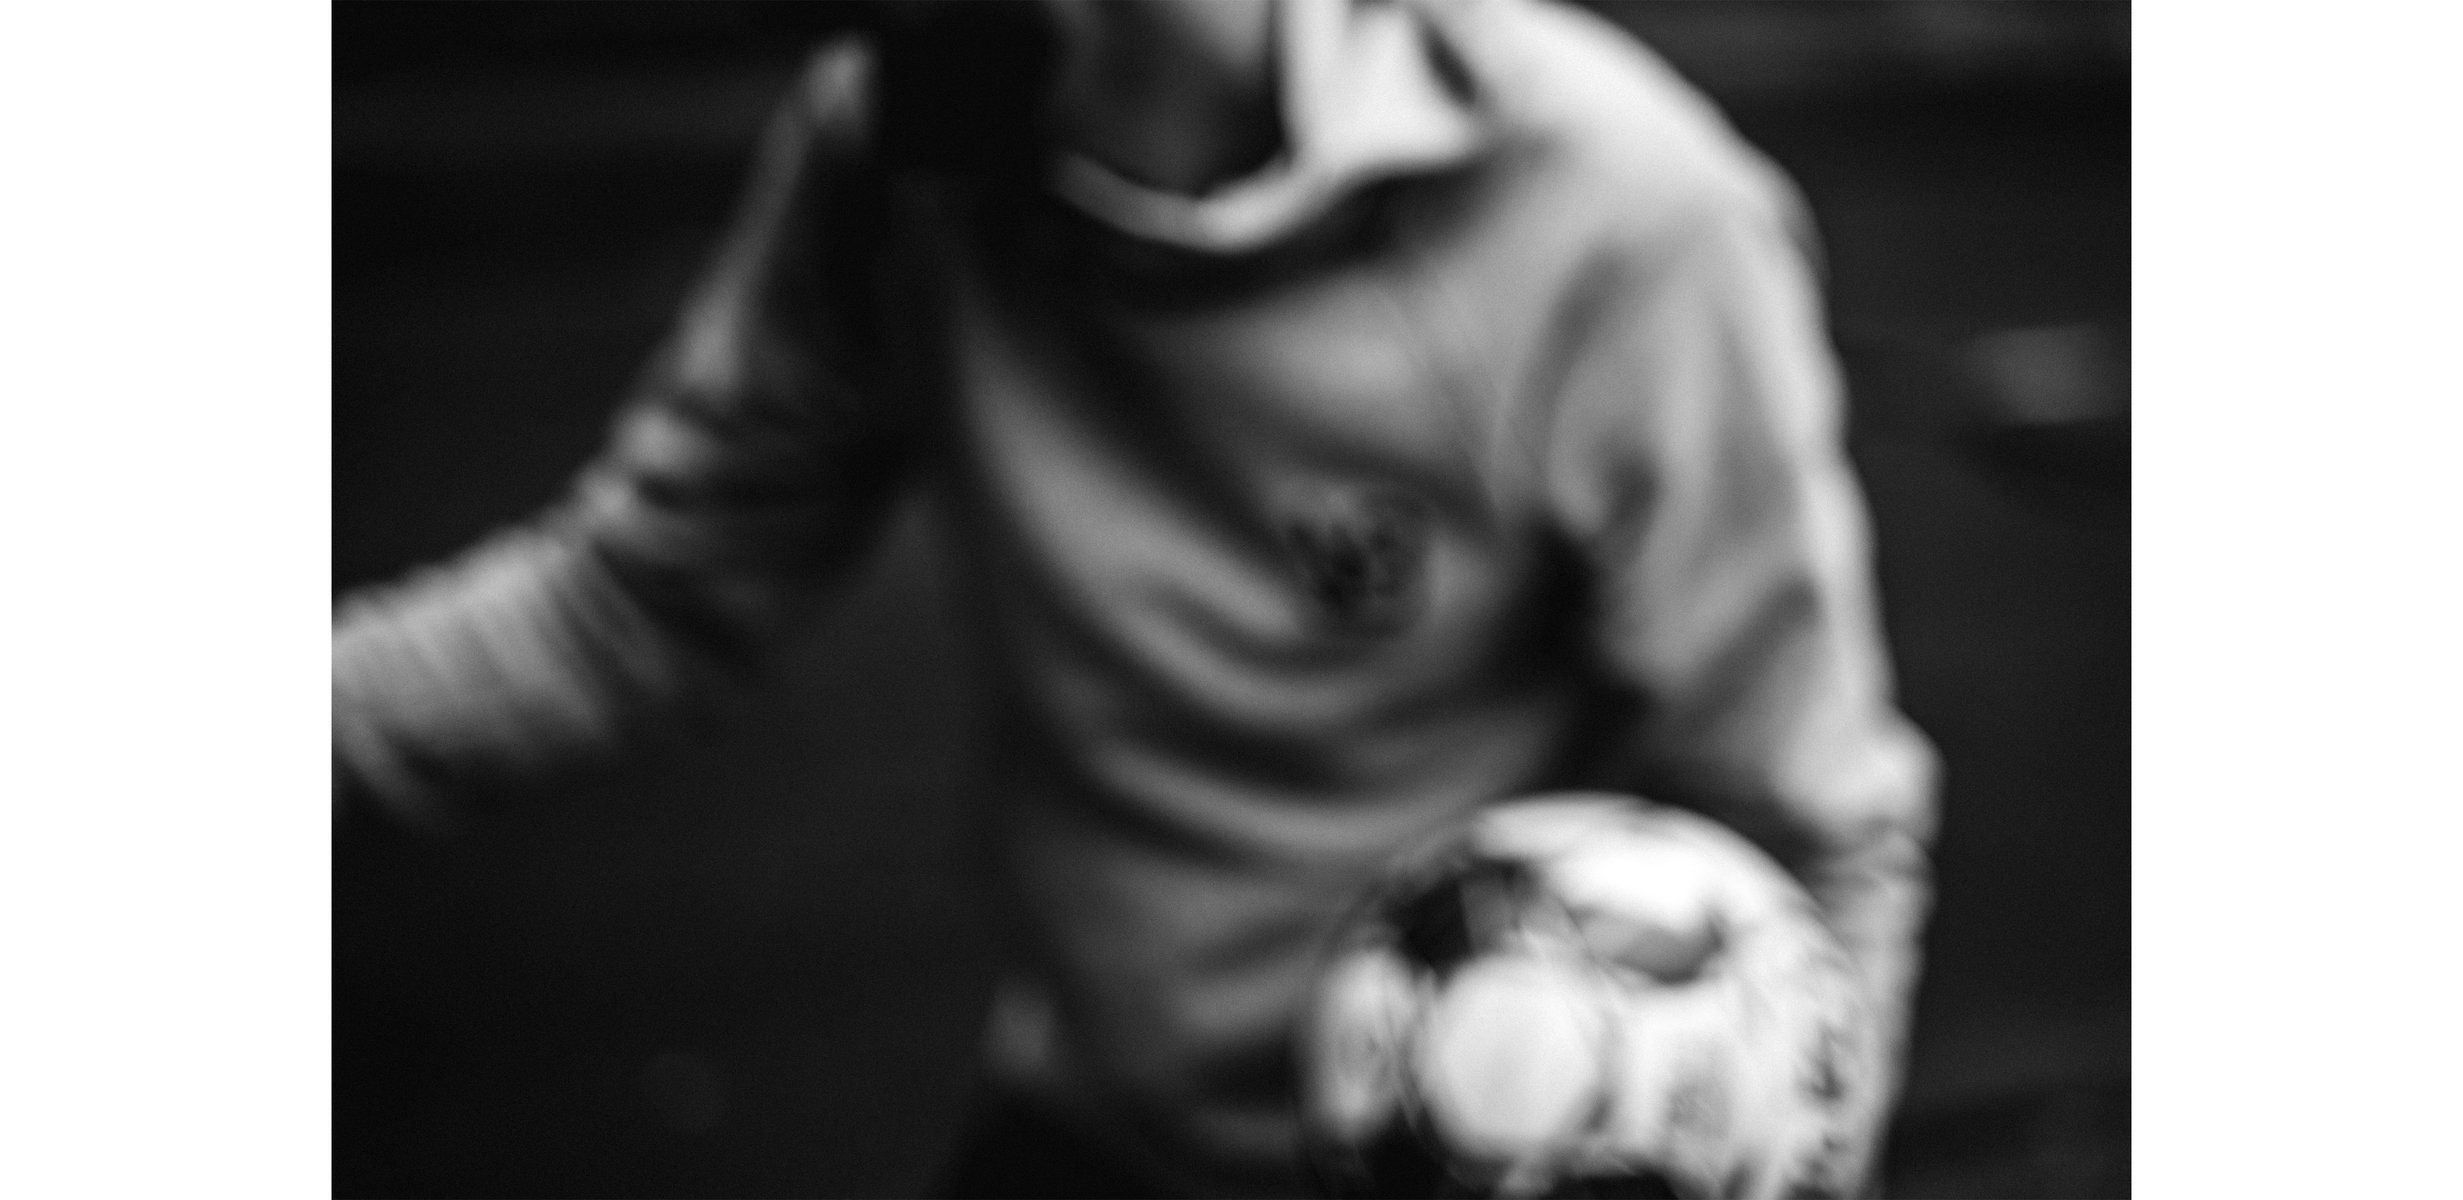  Lyvecap
A blurred image of a soccer player wearing a grey sweatshirt, in motion and tossing a soccer ball from hand to hand. by Sydney SG